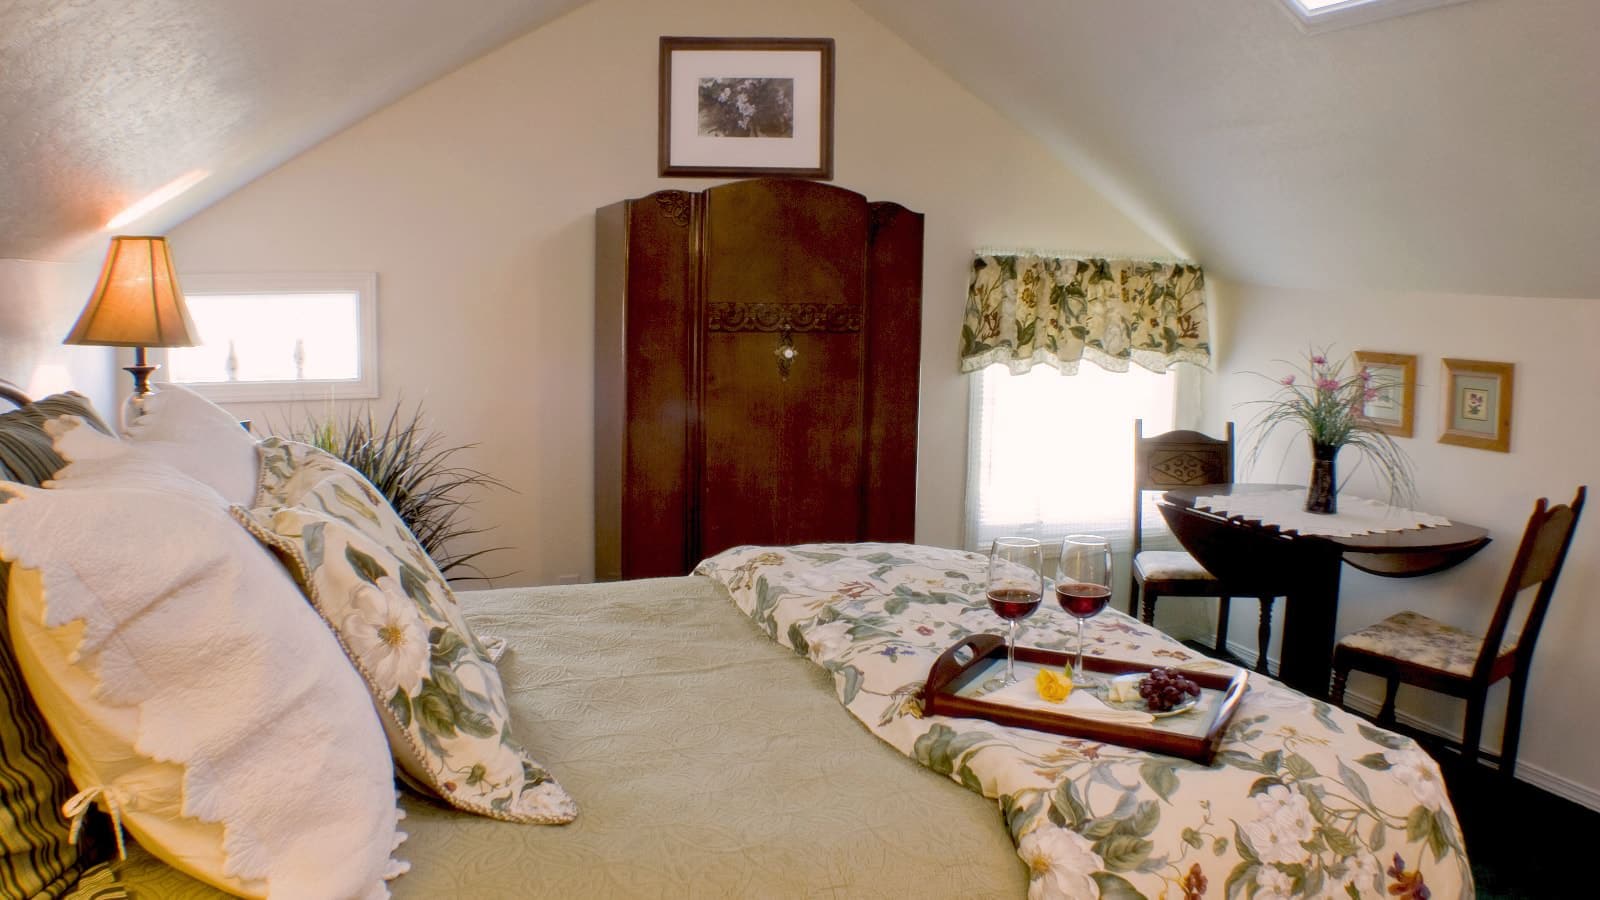 Bedroom with white walls, carpeting, multicolored floral bedding, dark wooden antique armoire, and sitting area